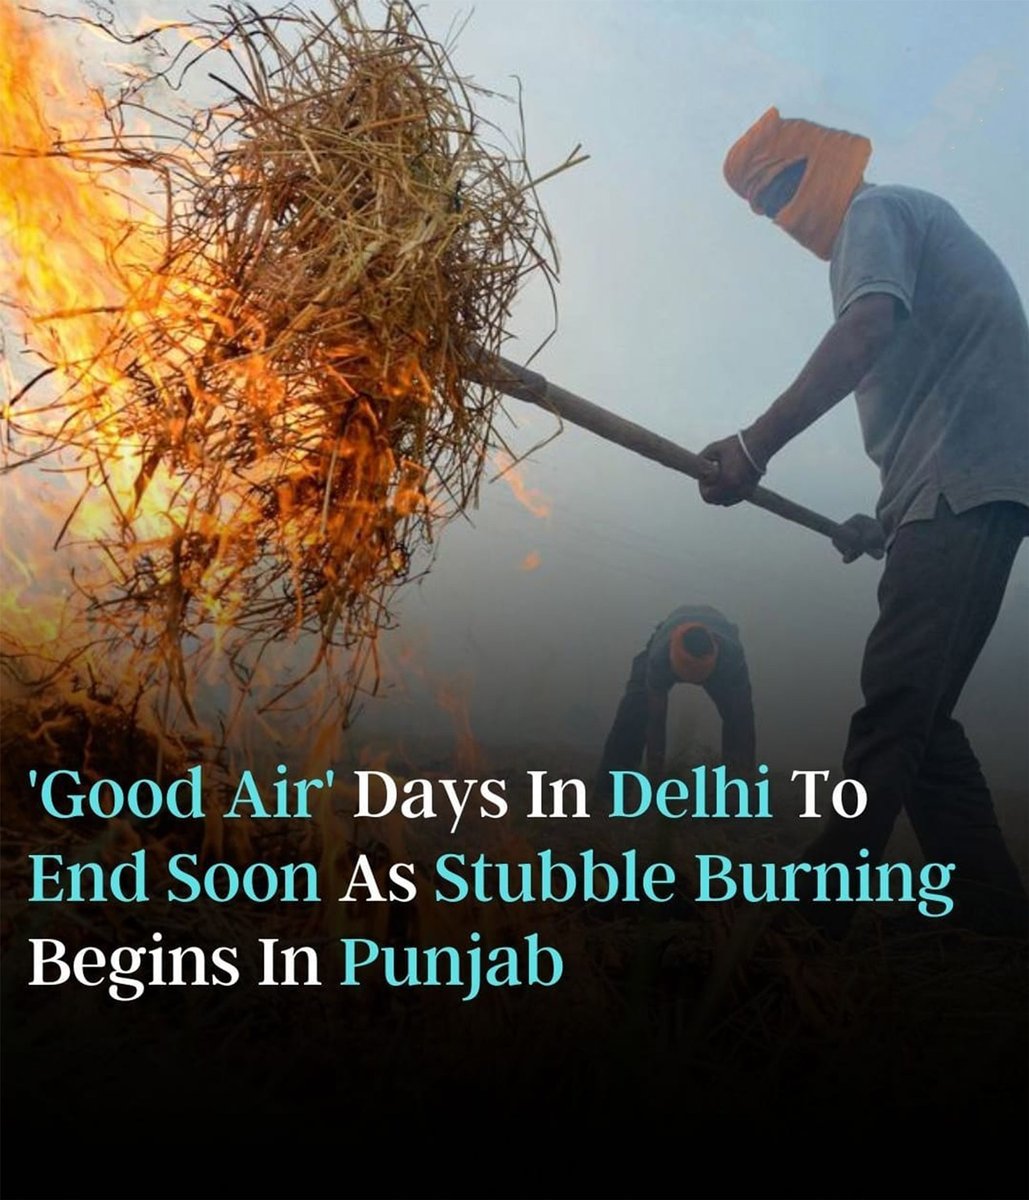 over the last several years, stubble burning in the city's
neighboring states choked Delhi during winters.
#CleanAirDelhi #Punjab #india #Delhi #stubbleburning #stubble